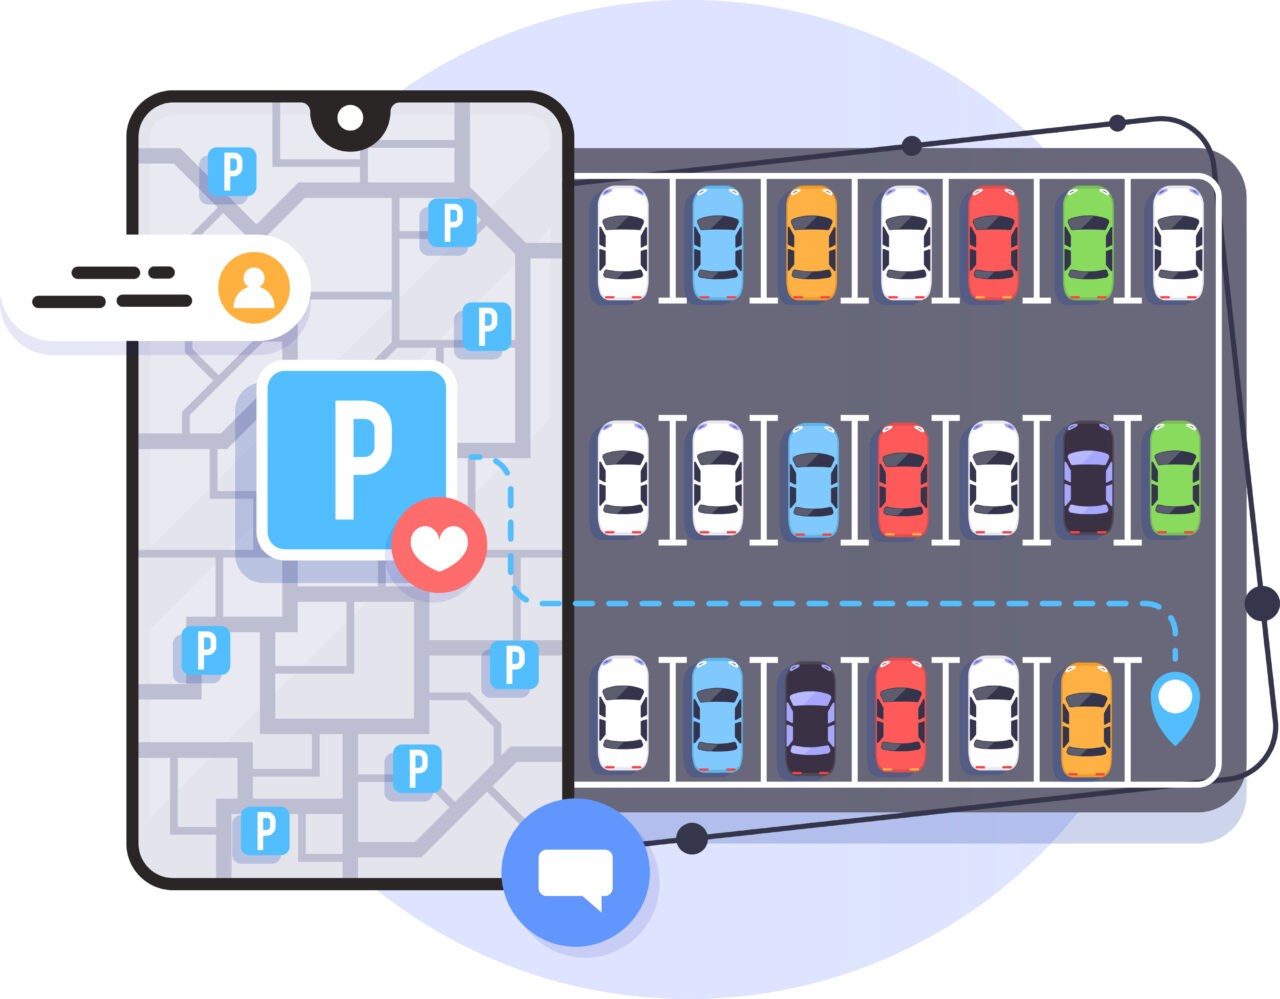 The photo shows an app that can be used for tracking free parking spots and paying for services.